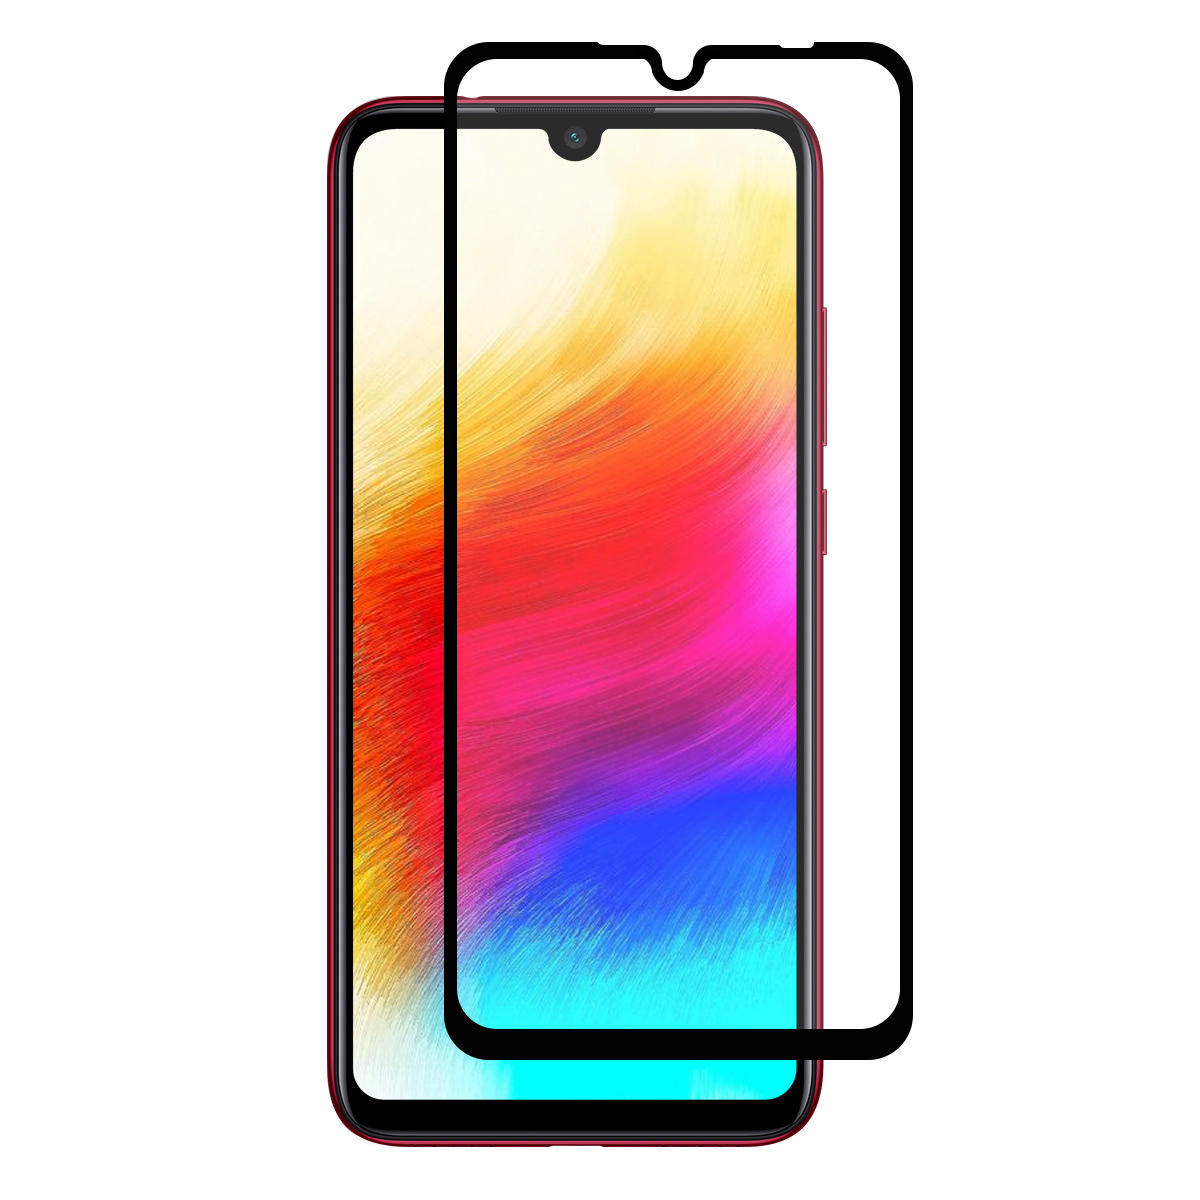 Enkay Full Cover Anti-explosion HD Clear Tempered Glass Screen Protector for Xiaomi Redmi Note 7 / N